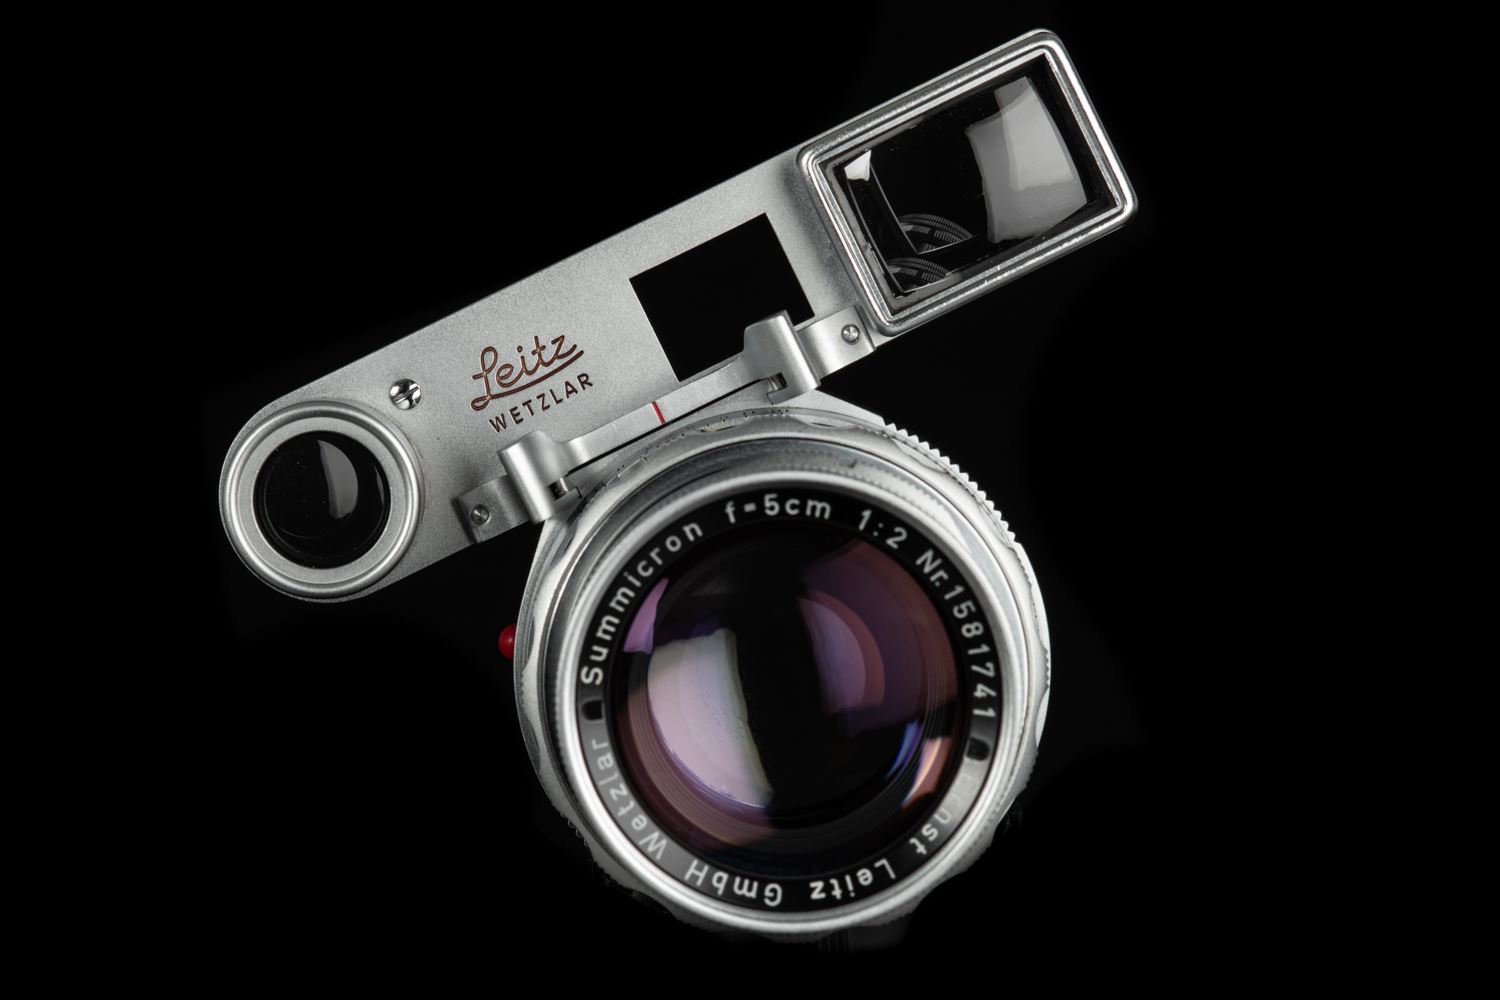 Picture of Leica Summicron-M 50mm f/2 DR Dual Range